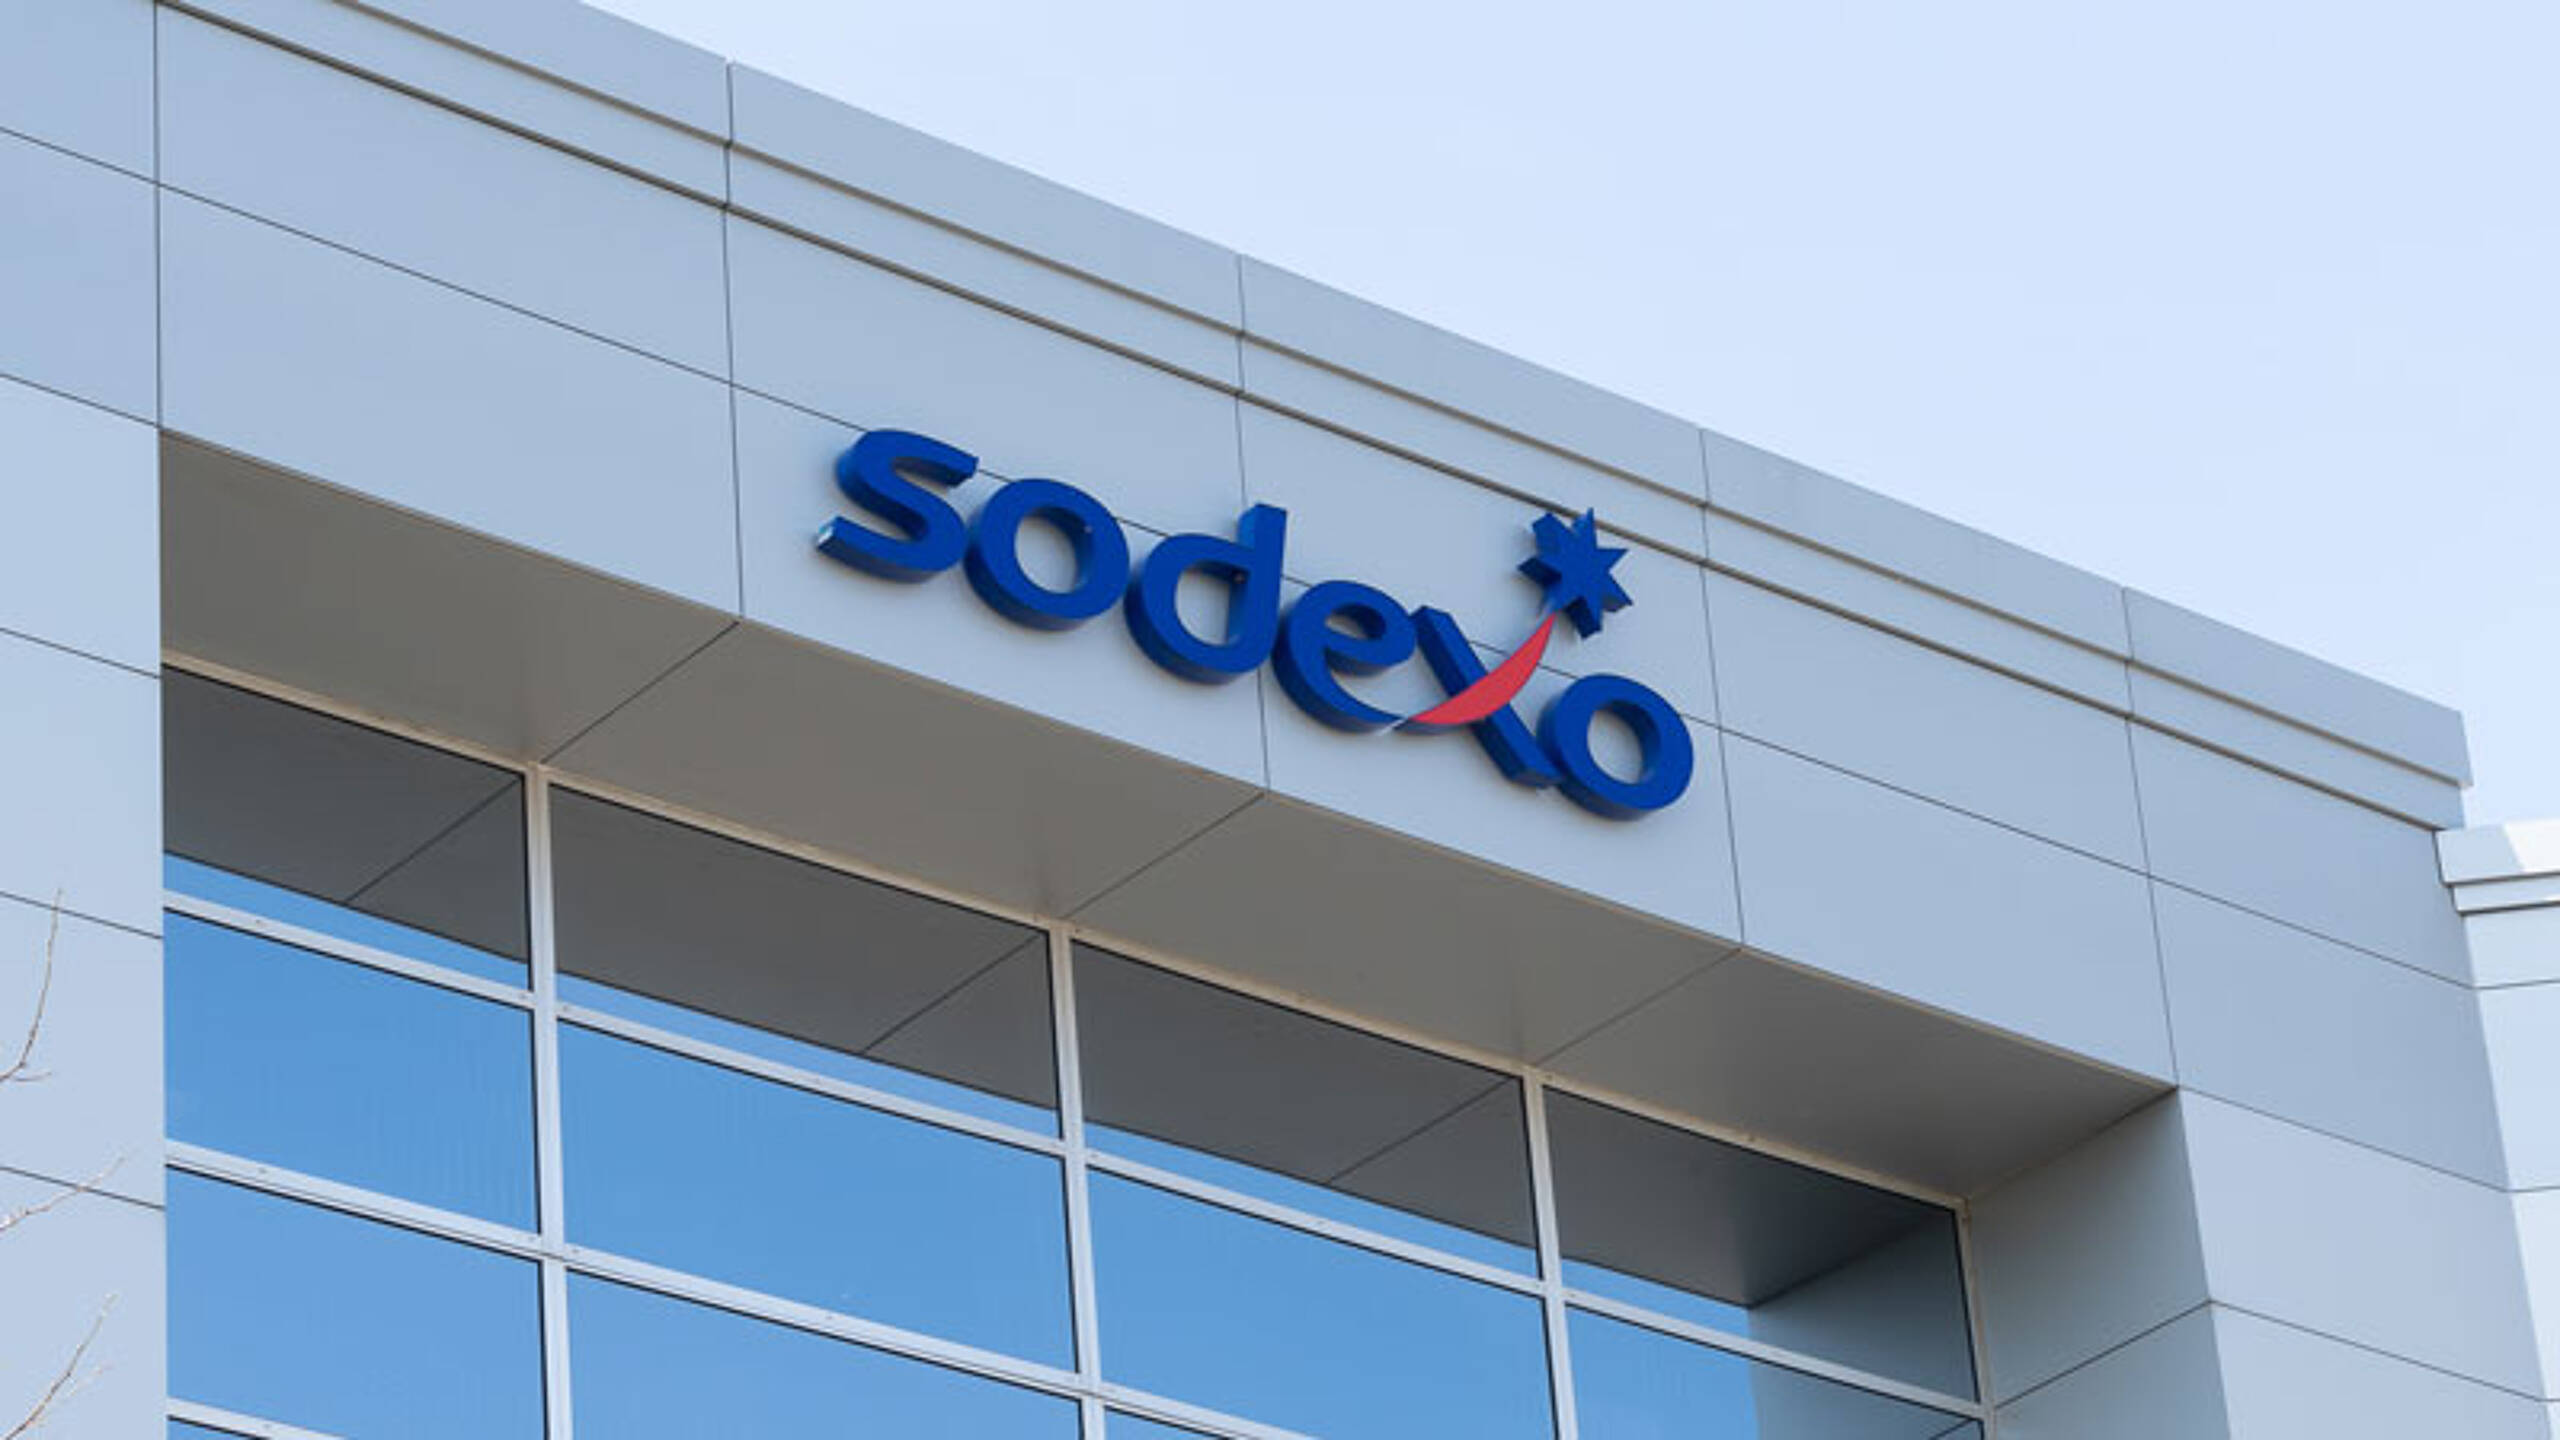 Sodexo outlines plans to cut ties with suppliers lagging on climate